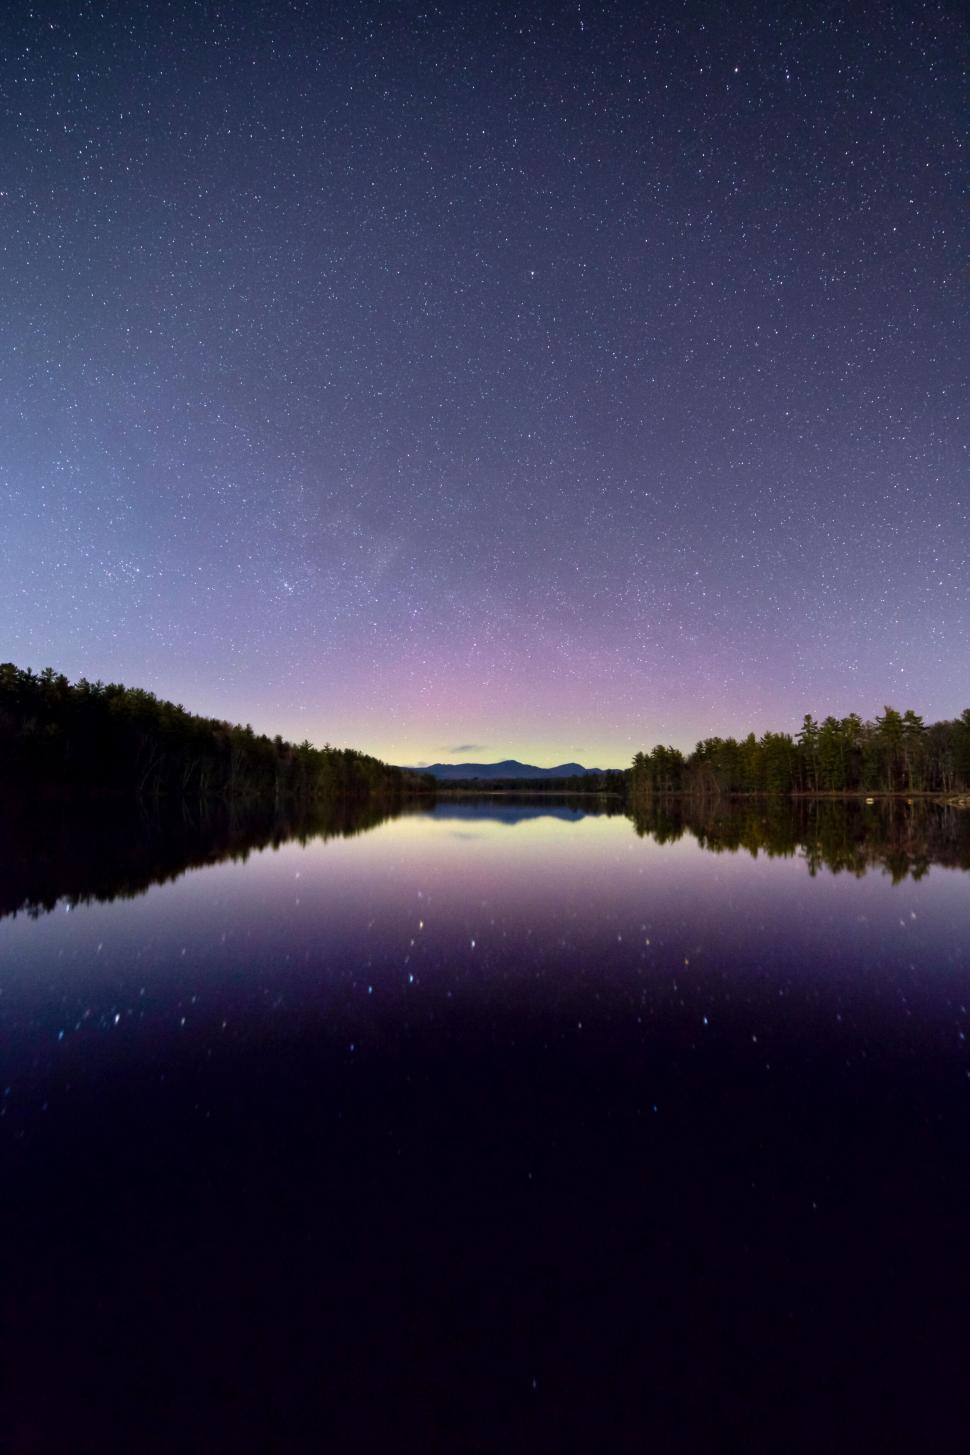 Free Image of Starry night sky reflected in a tranquil lake 